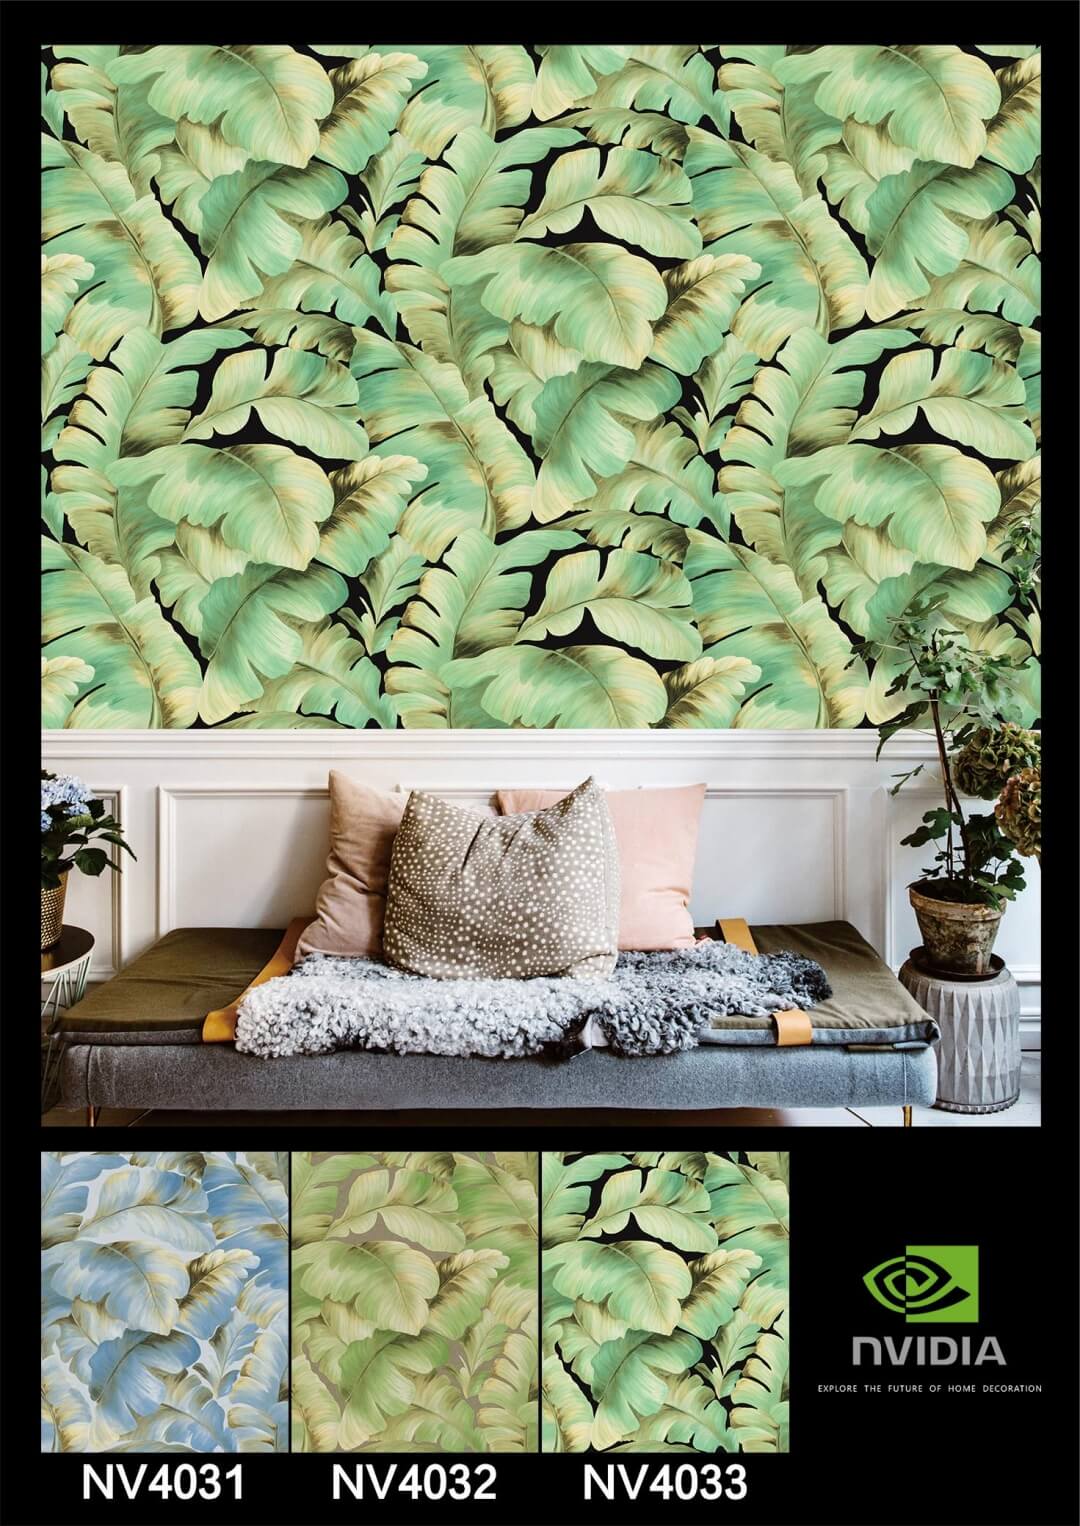 3D Waterproof Home Wallpaper at Lowest Price (4)